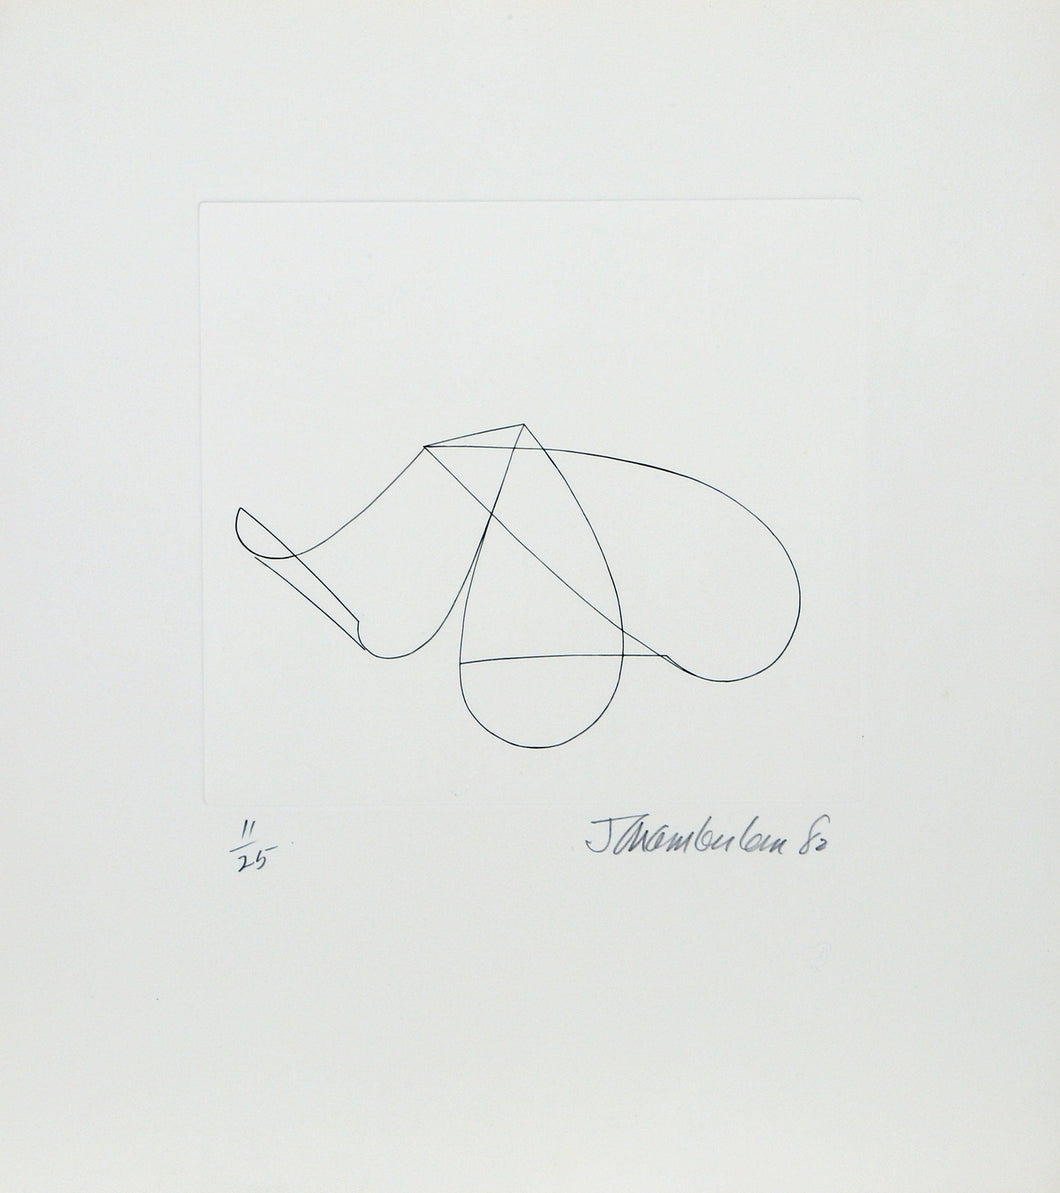 Linear Abstract 2 Etching | John Chamberlain,{{product.type}}